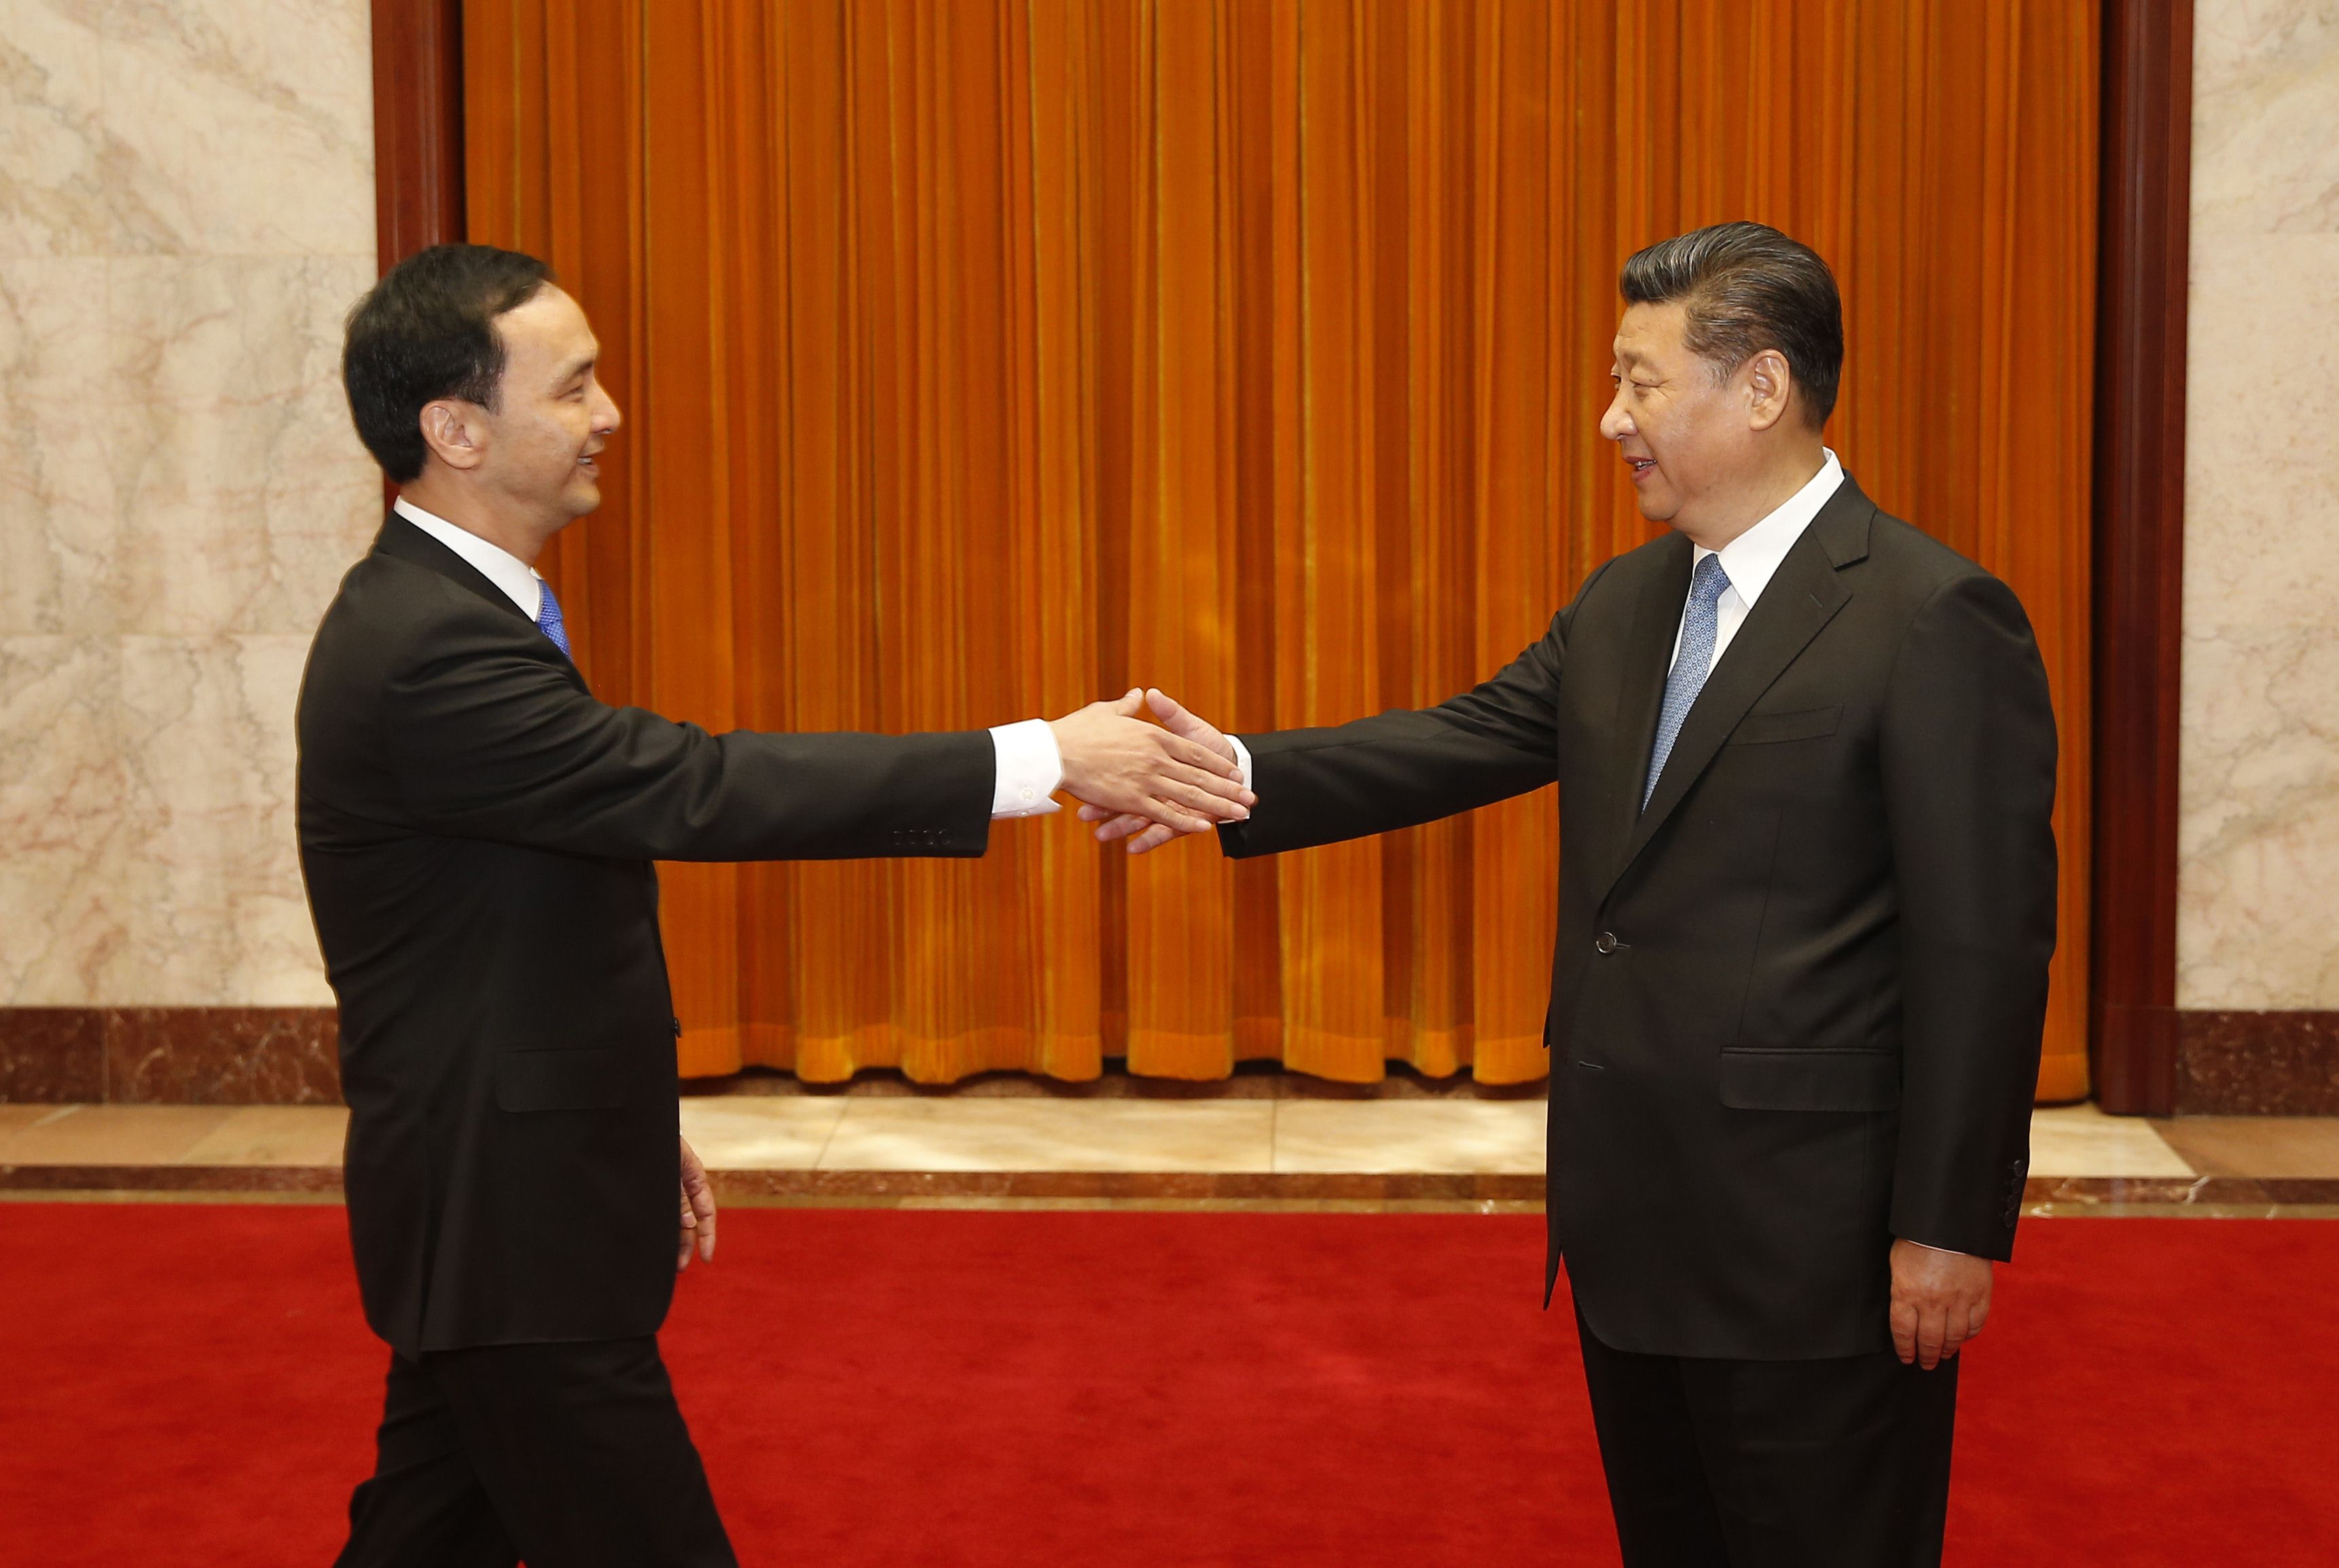 During Xi's meeting with KMT chairman Eric Chu (left), Xi proposed five guidelines for strengthening ties that clearly reflected Beijing's strategic thinking. Photo: AFP